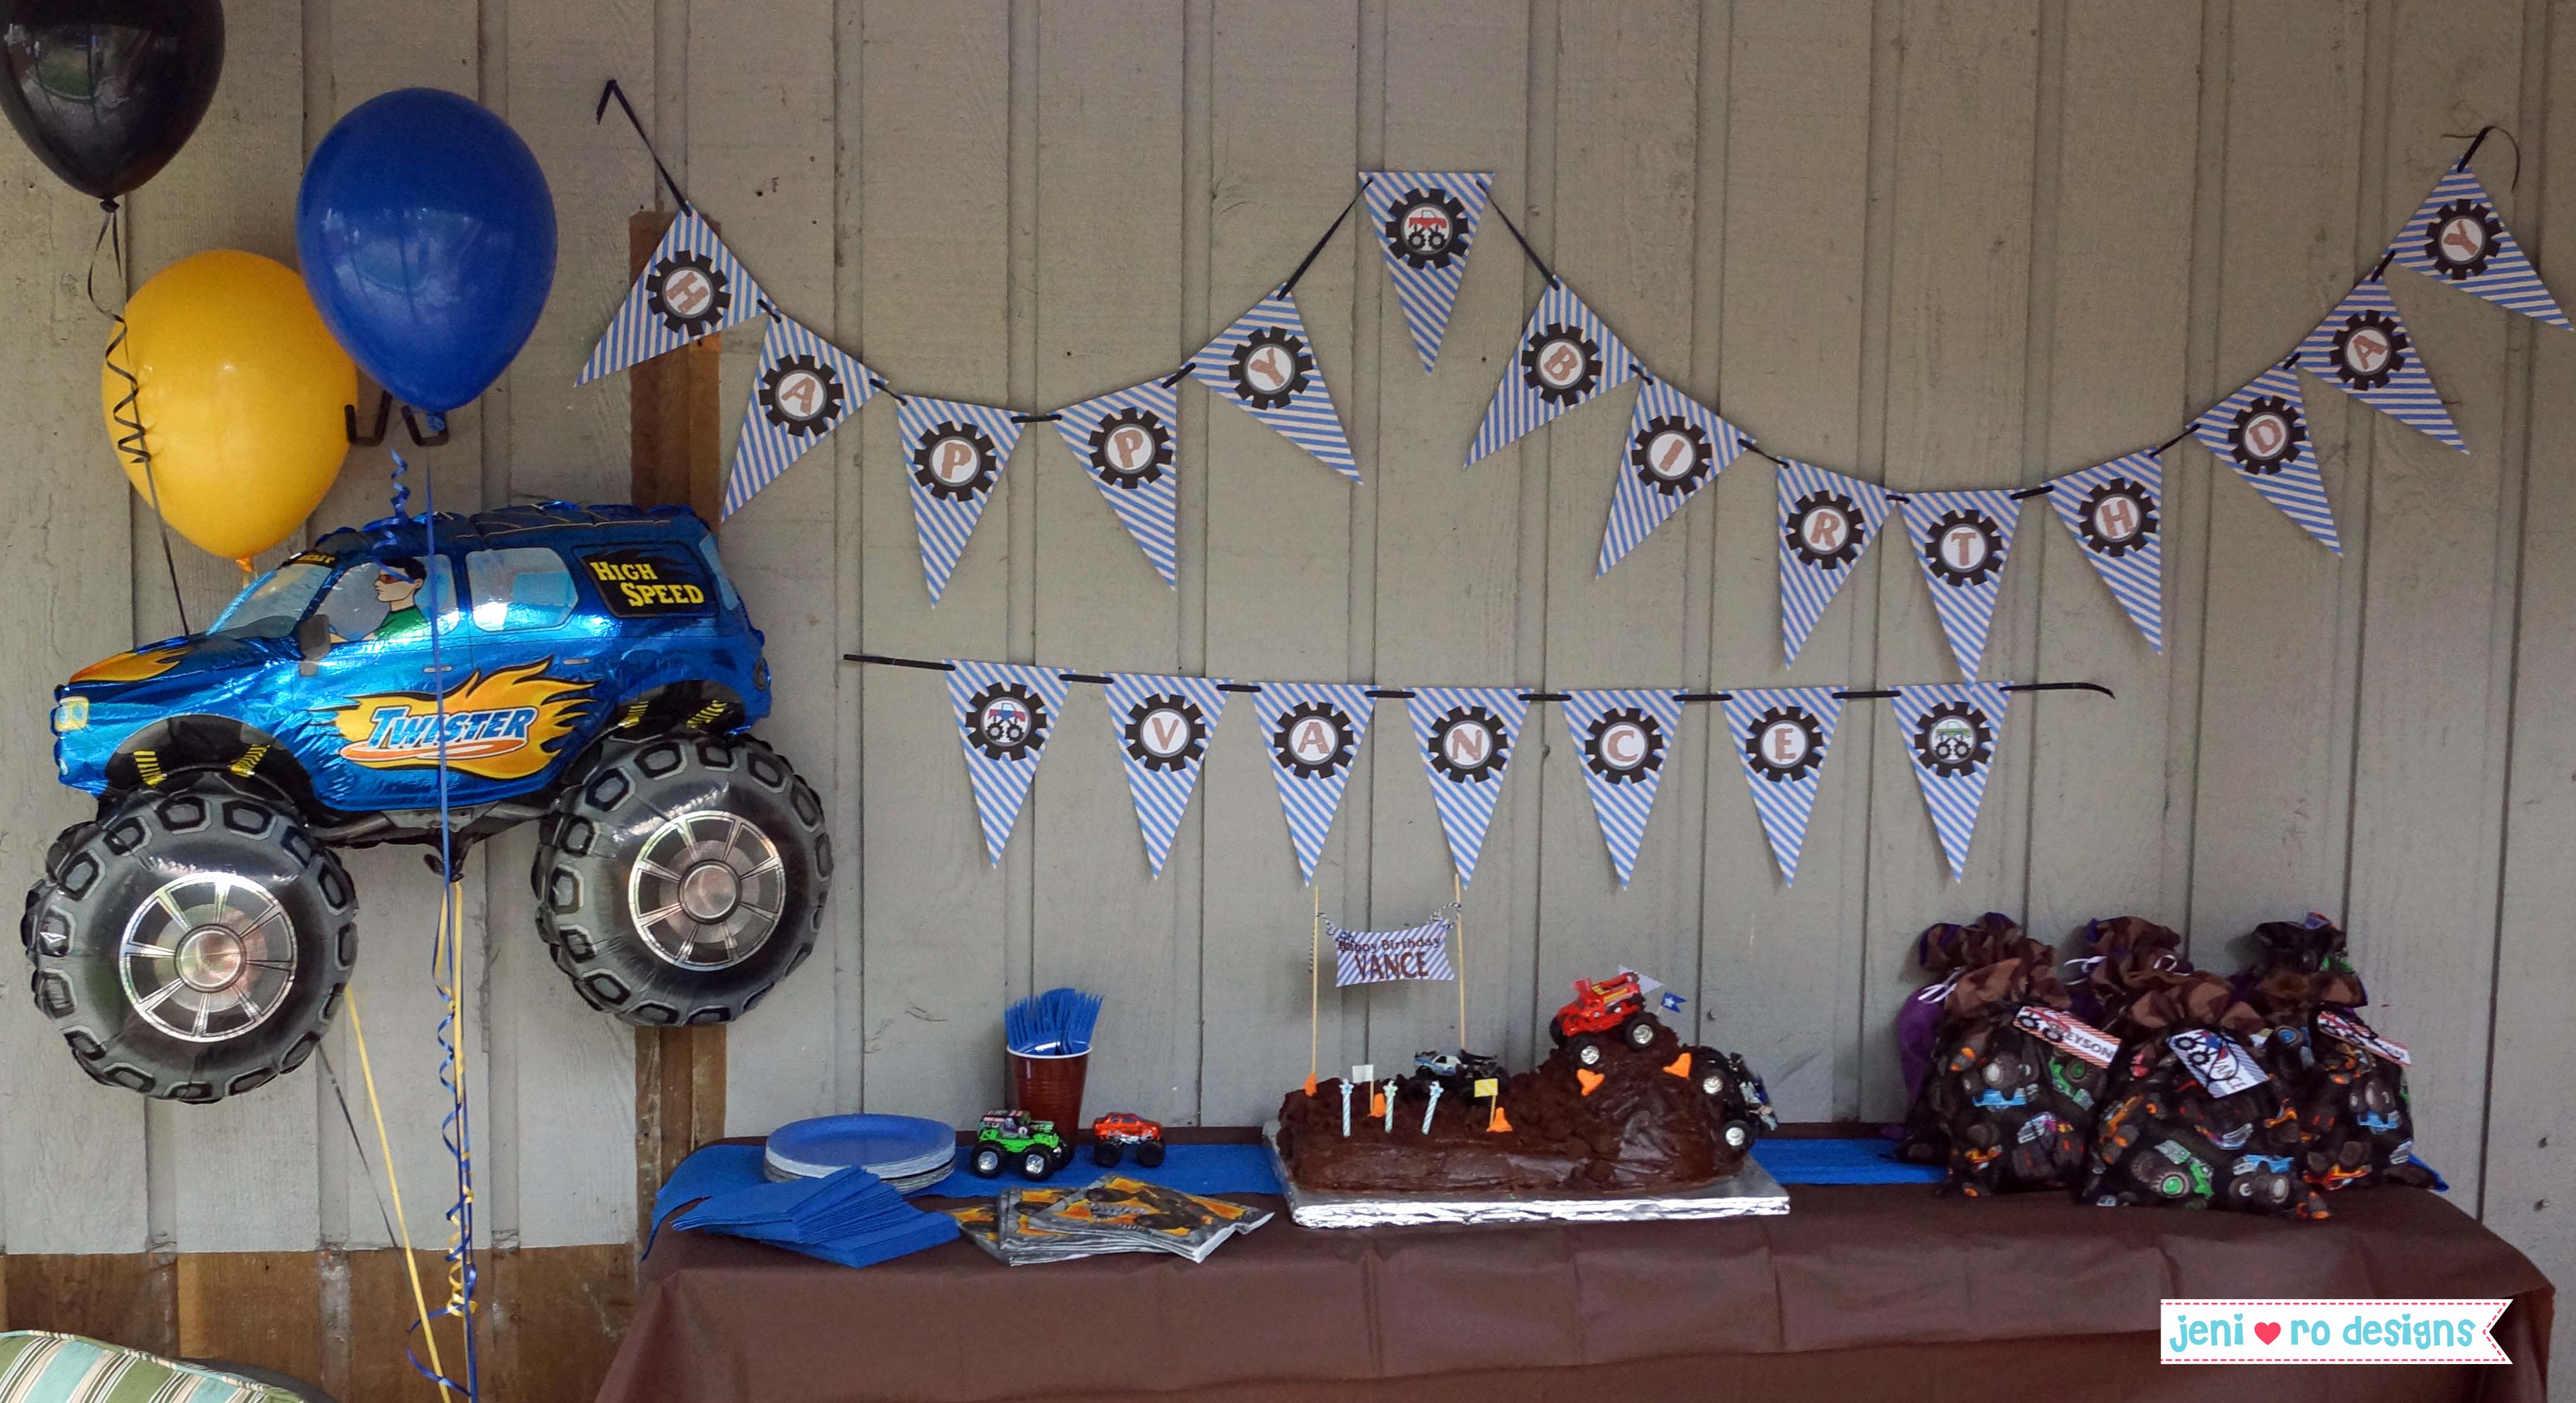 Mr. V's 3rd Monster Truck Birthday Party Part II - The Fun and Cake! • jeni  ro designs